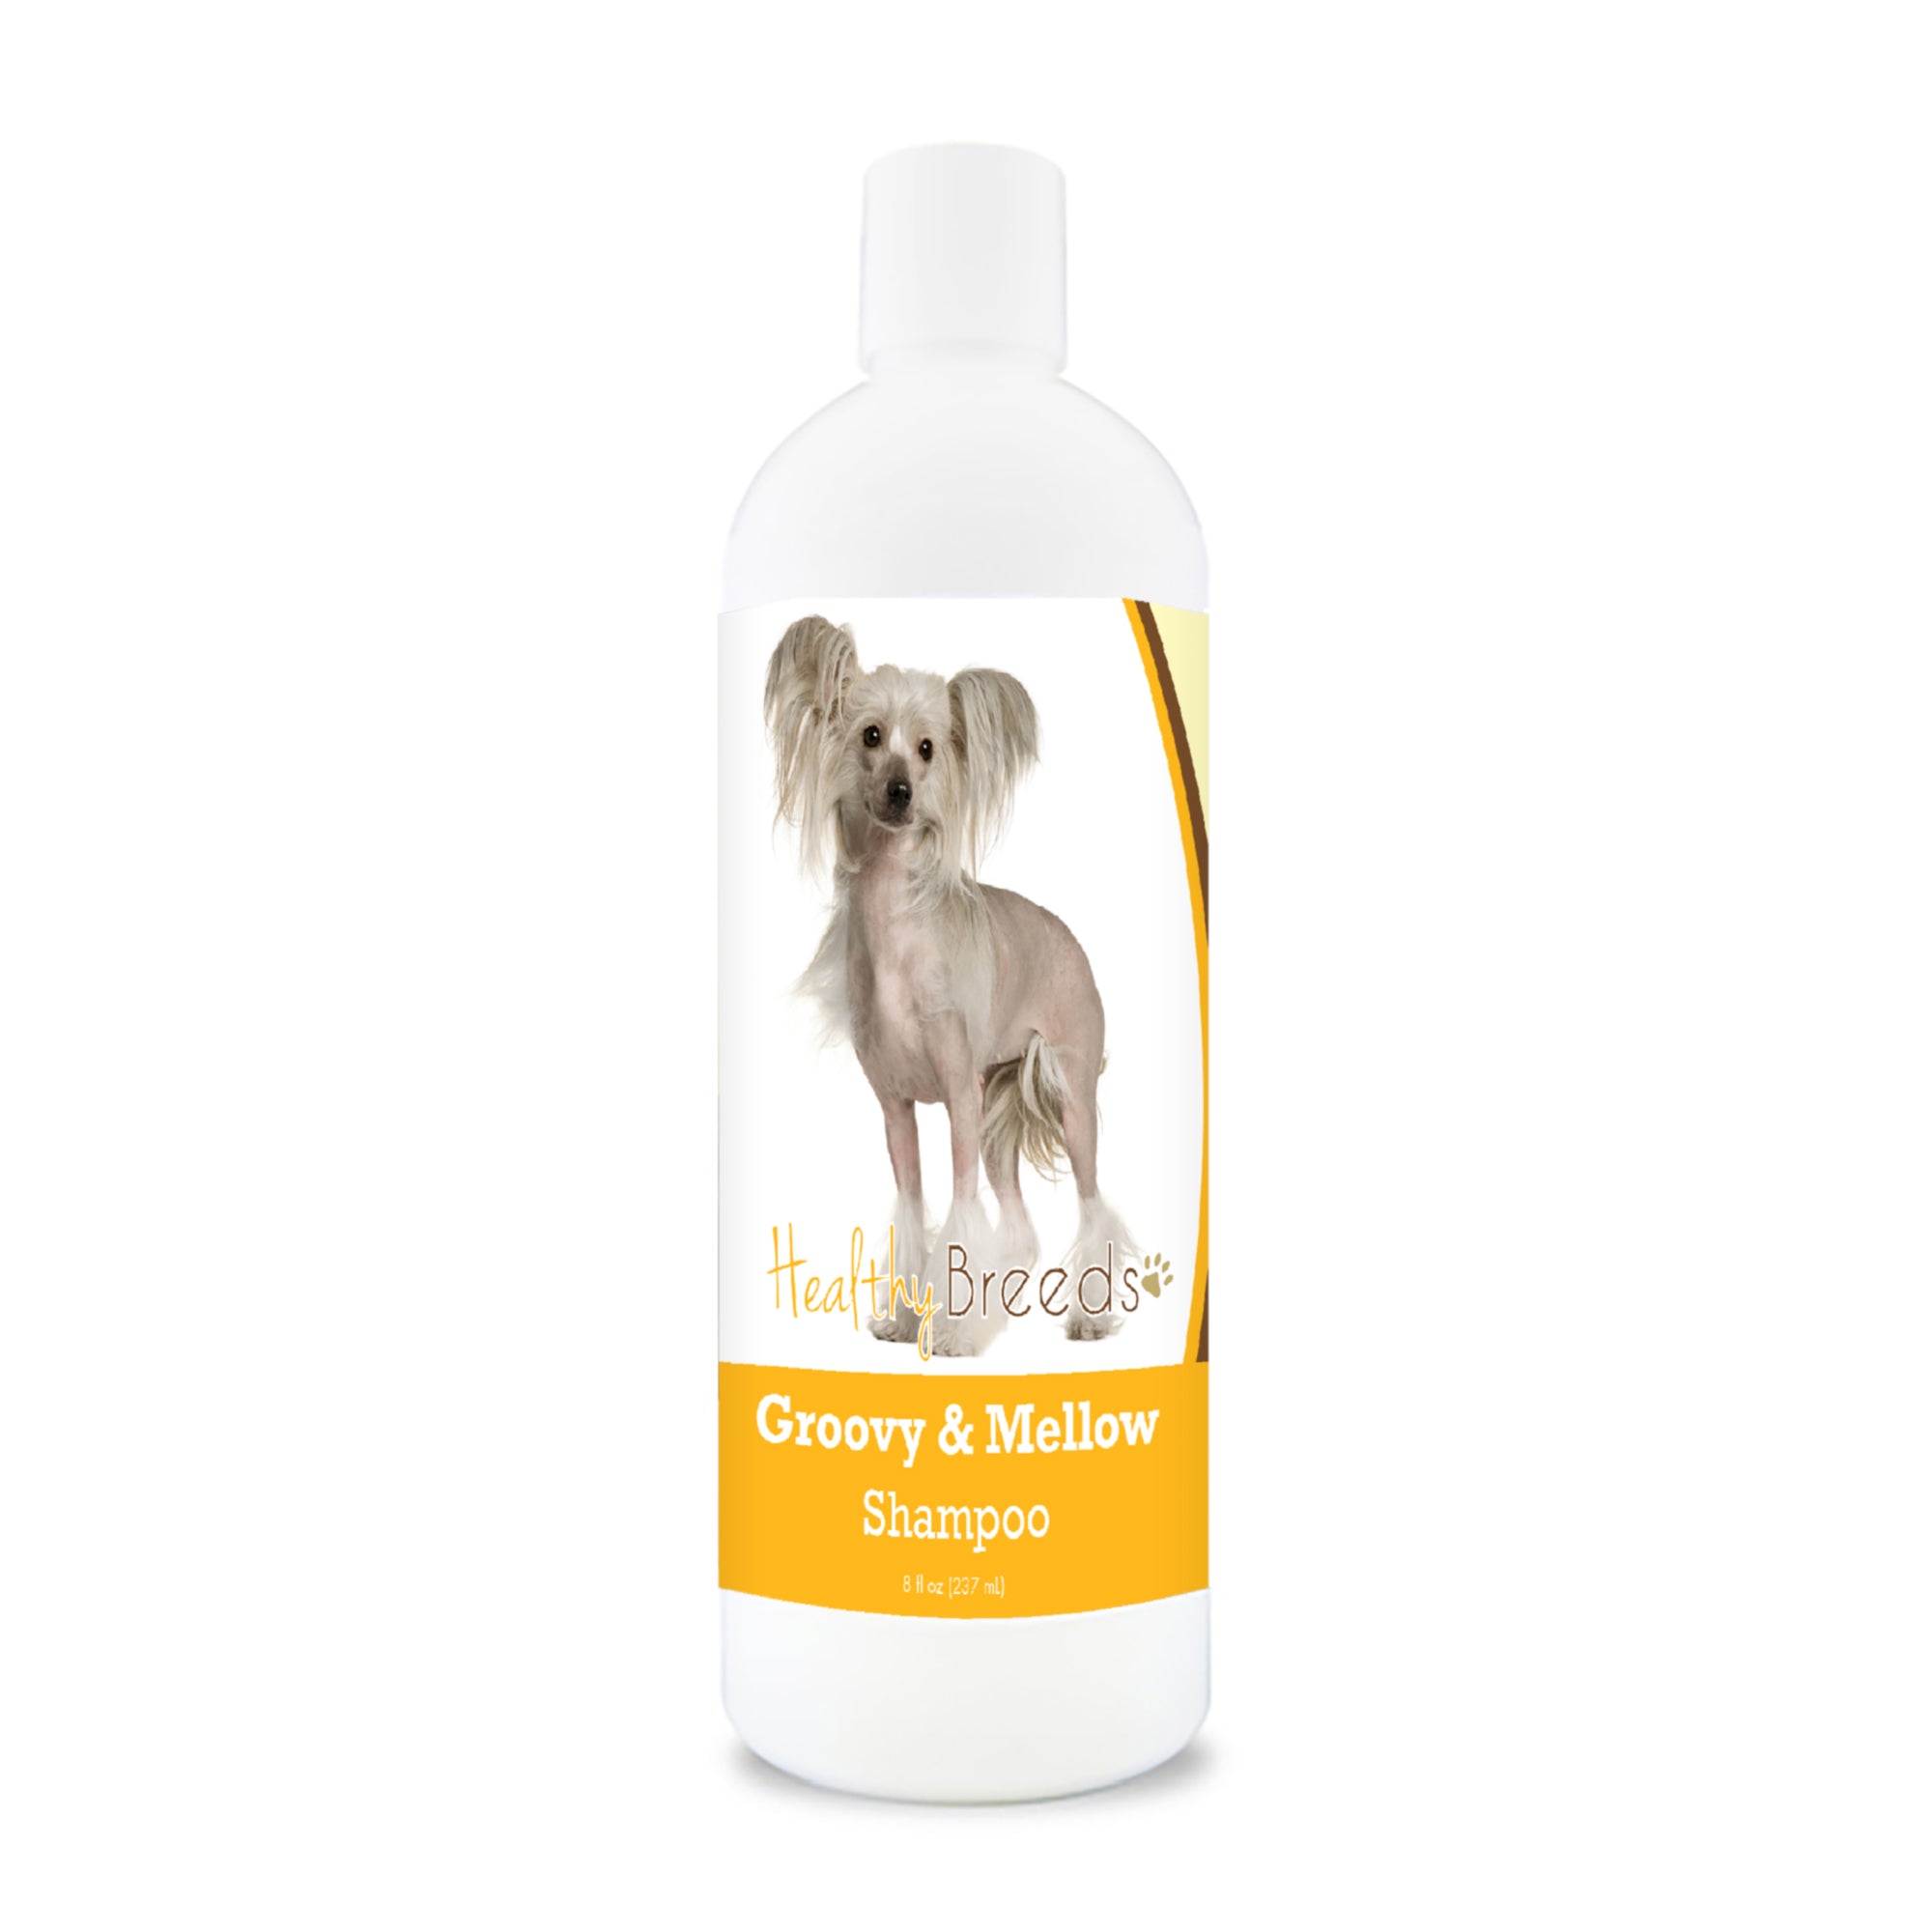 Chinese Crested Groovy & Mellow Shampoo 8 oz